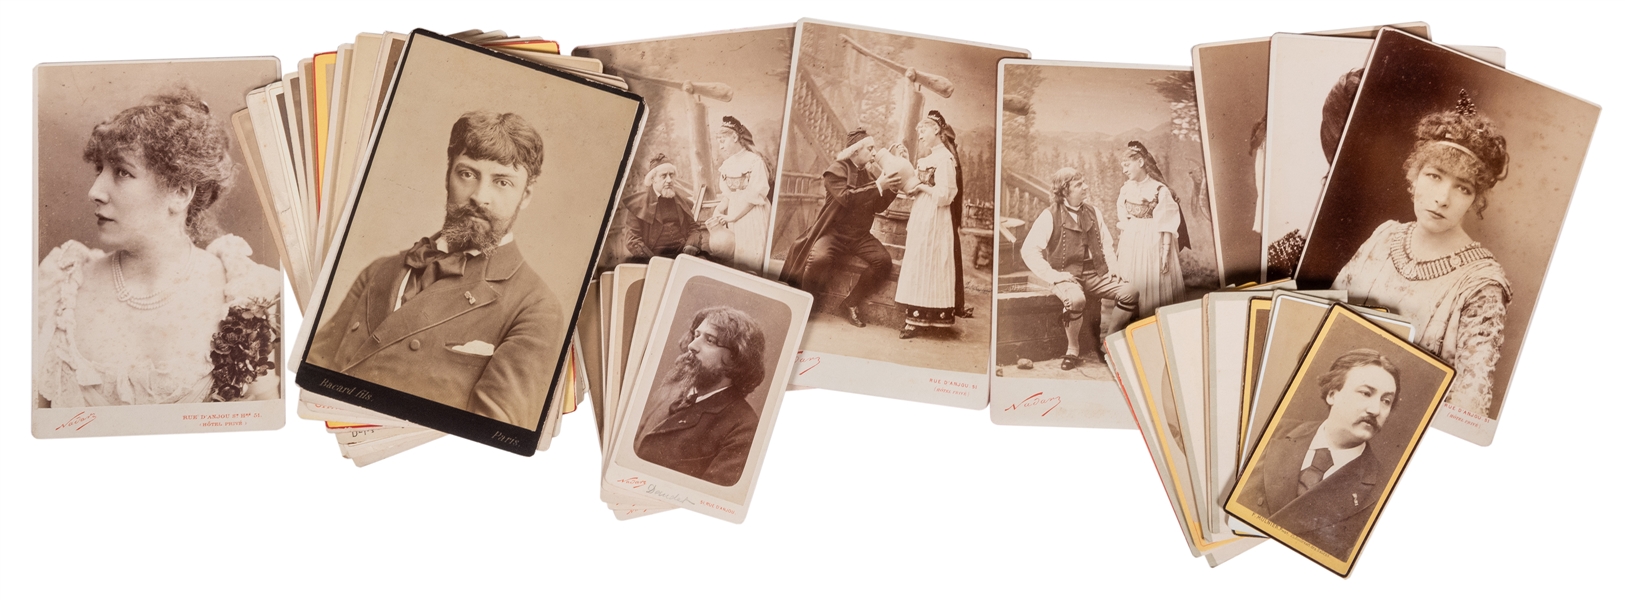  Collection of Cabinet Cards and CDVs of French Stage Perfor...